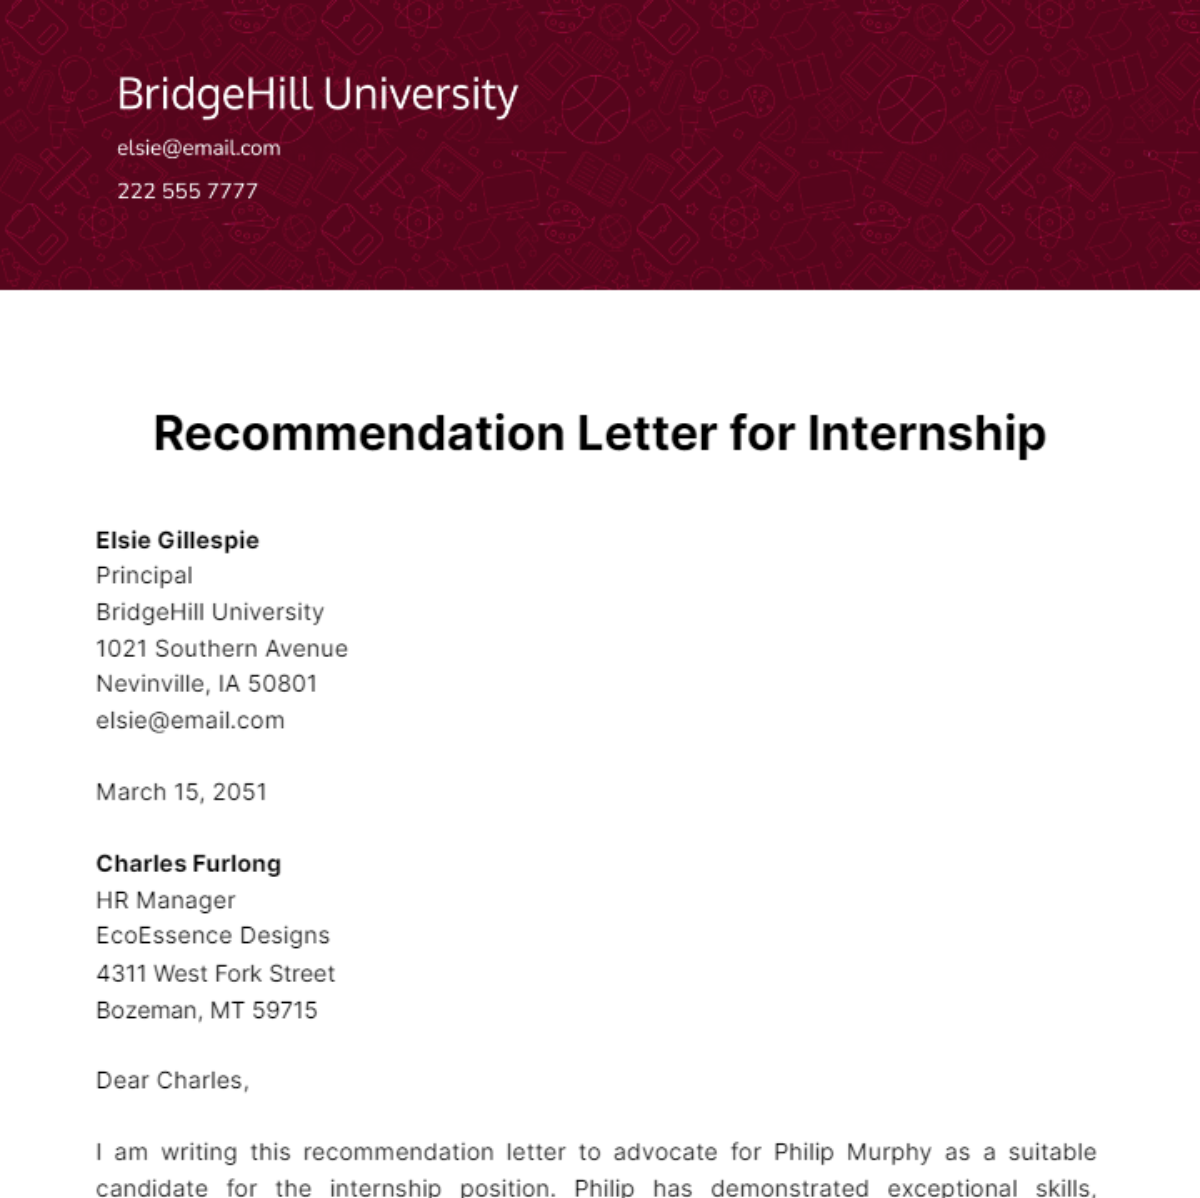 Recommendation Letter for Internship Template